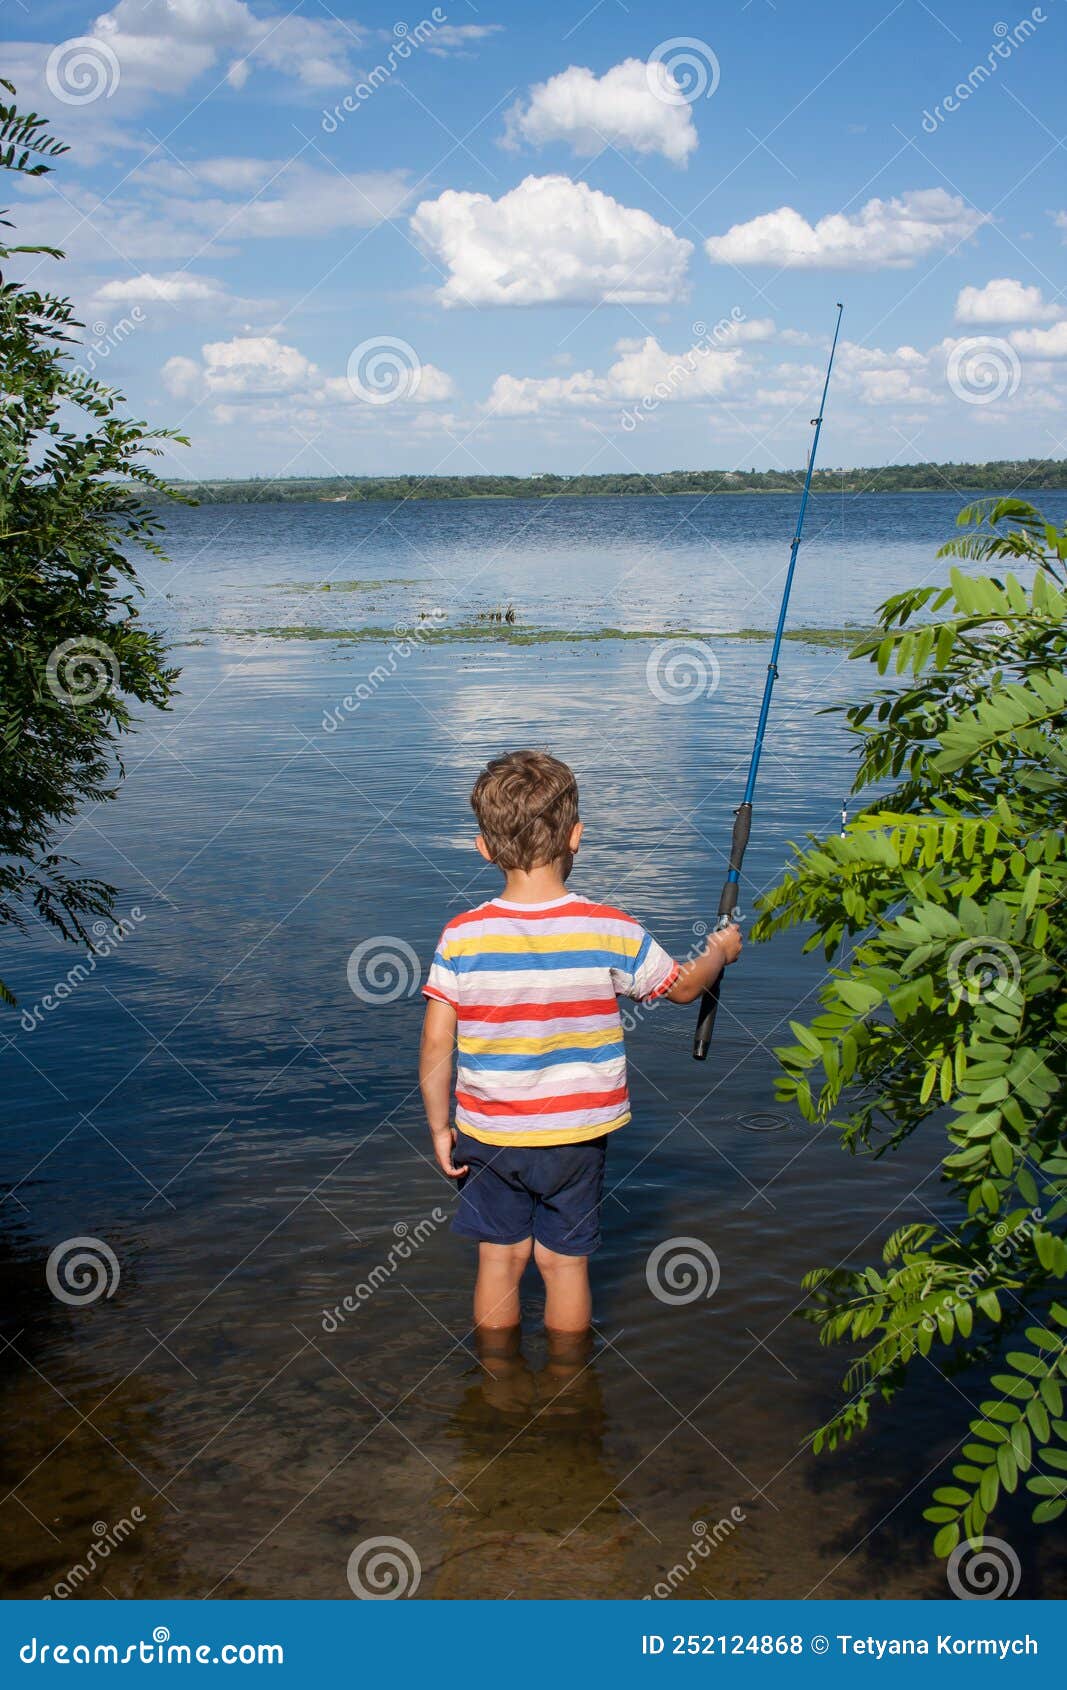 Child is Fishing in River on Sunny Summer Day. Boy Casts a Fishing